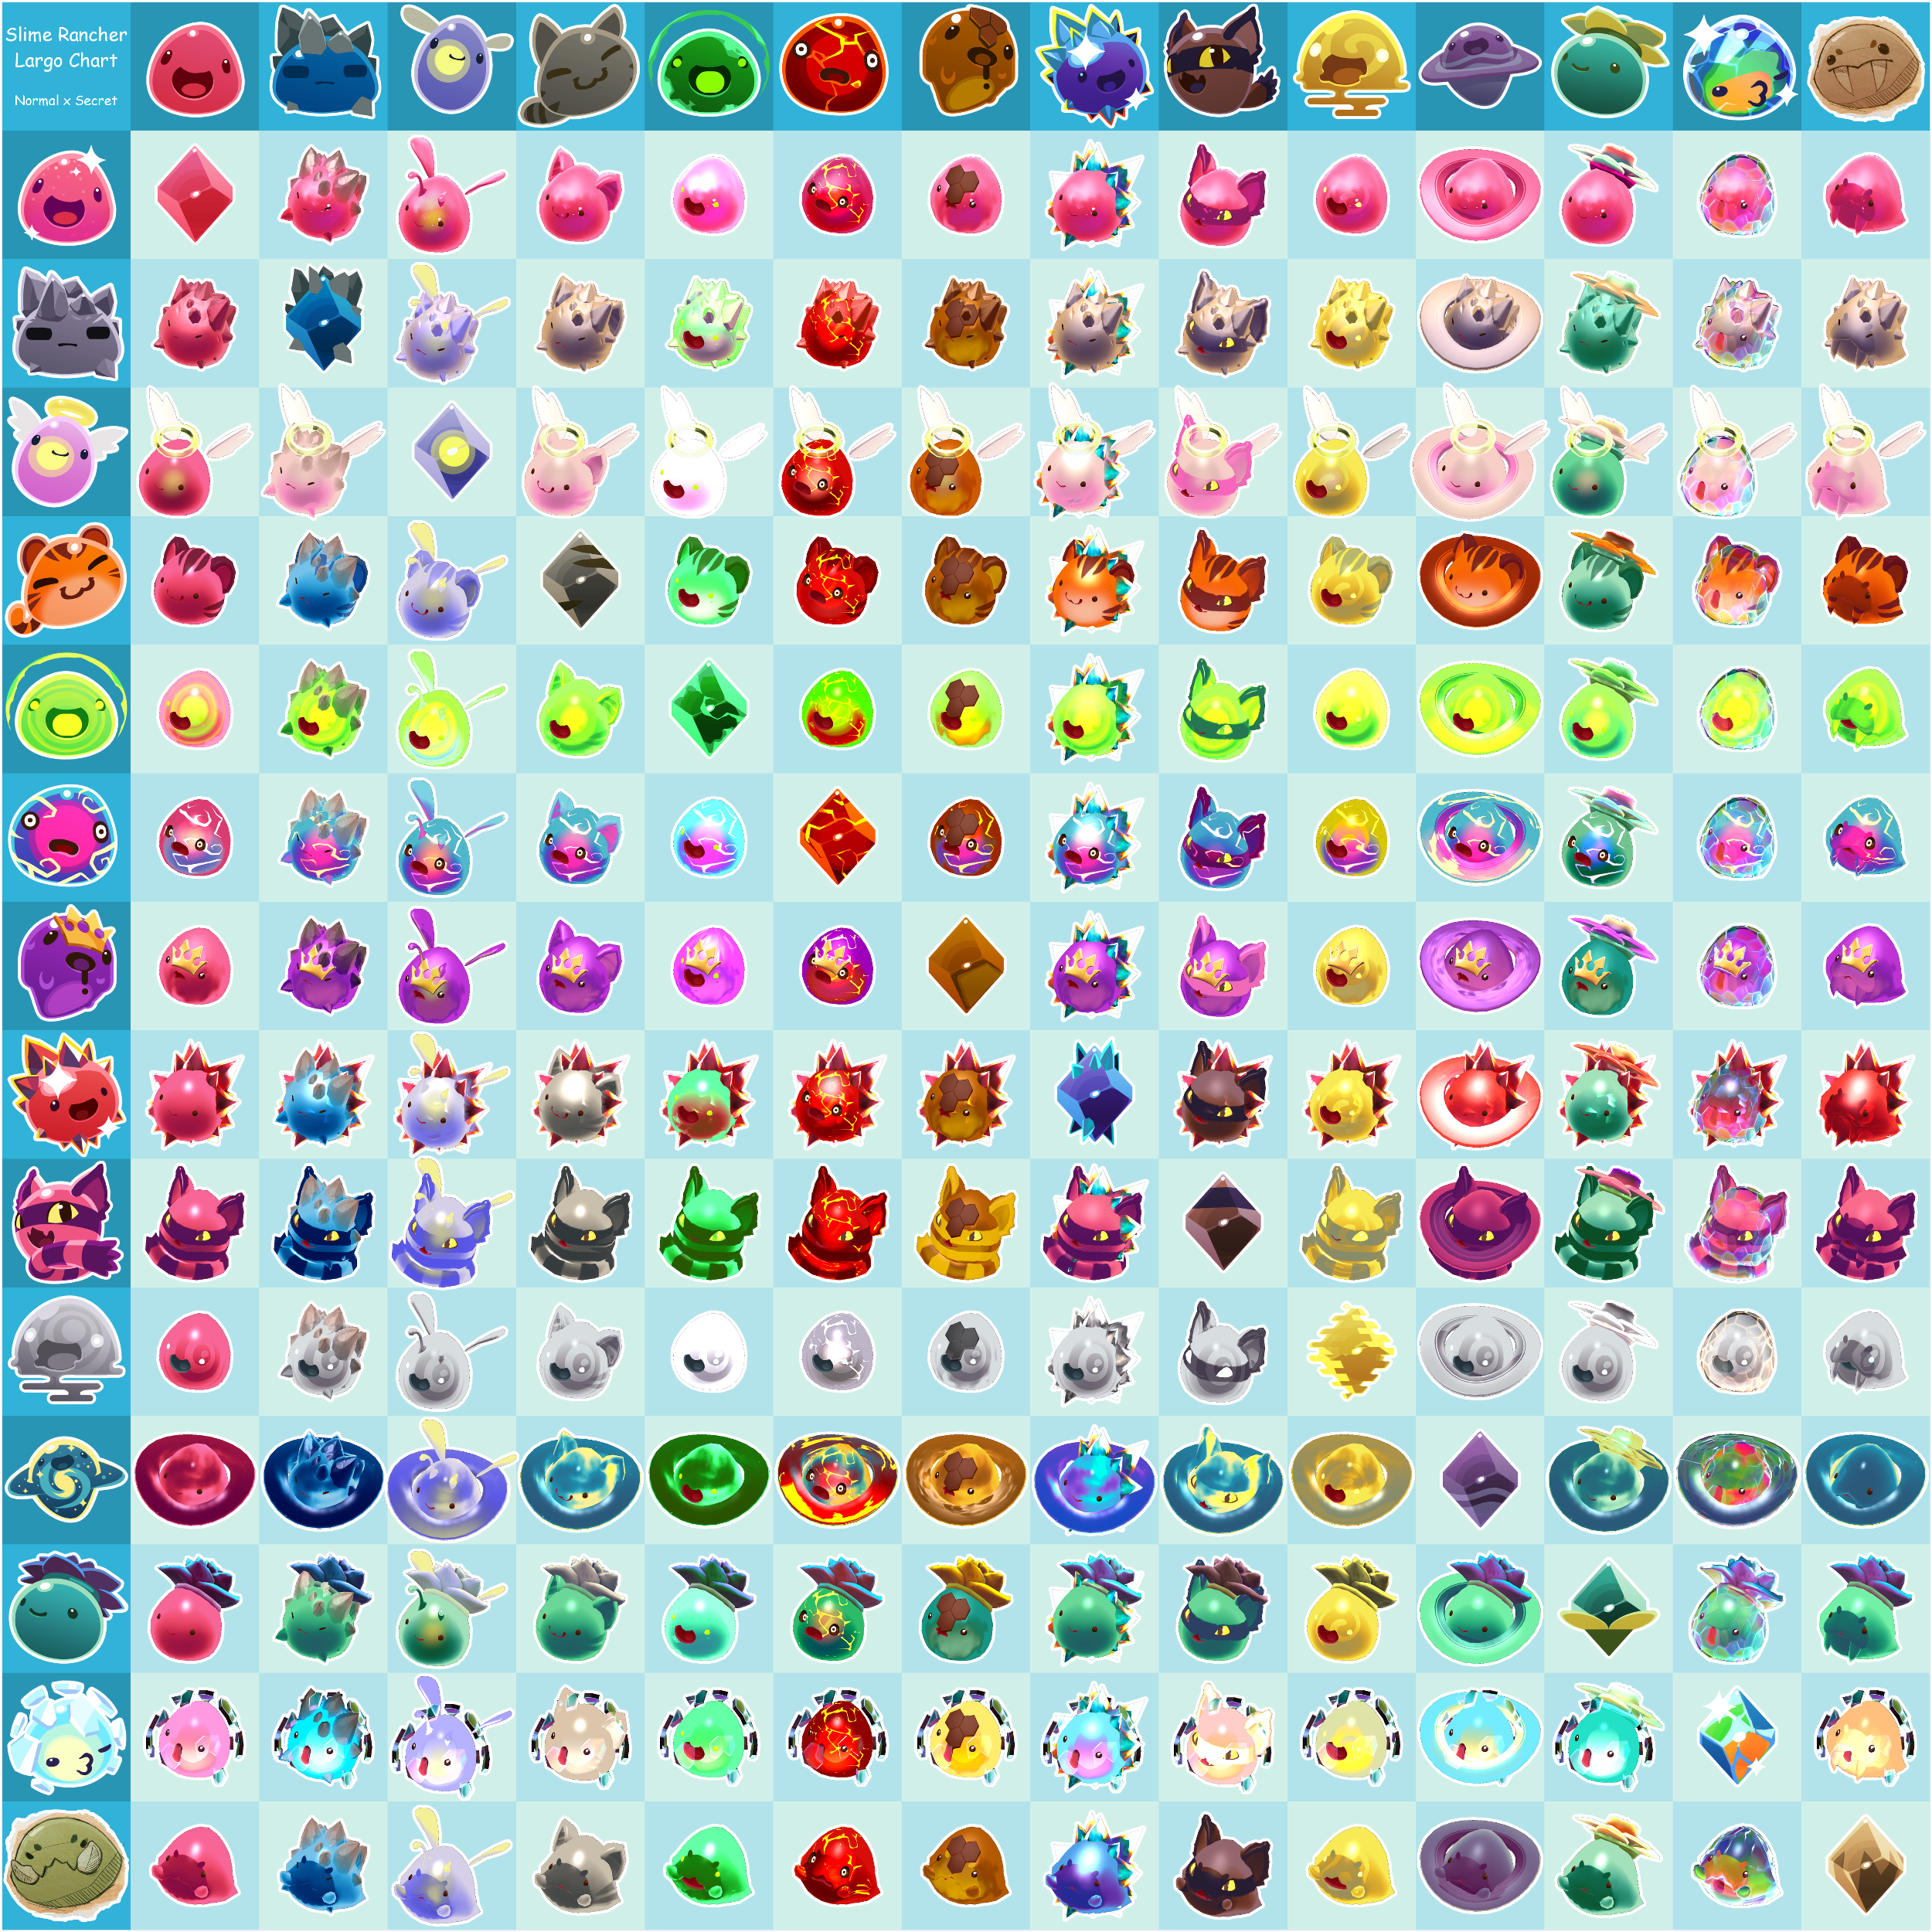 all slimes in slime rancher